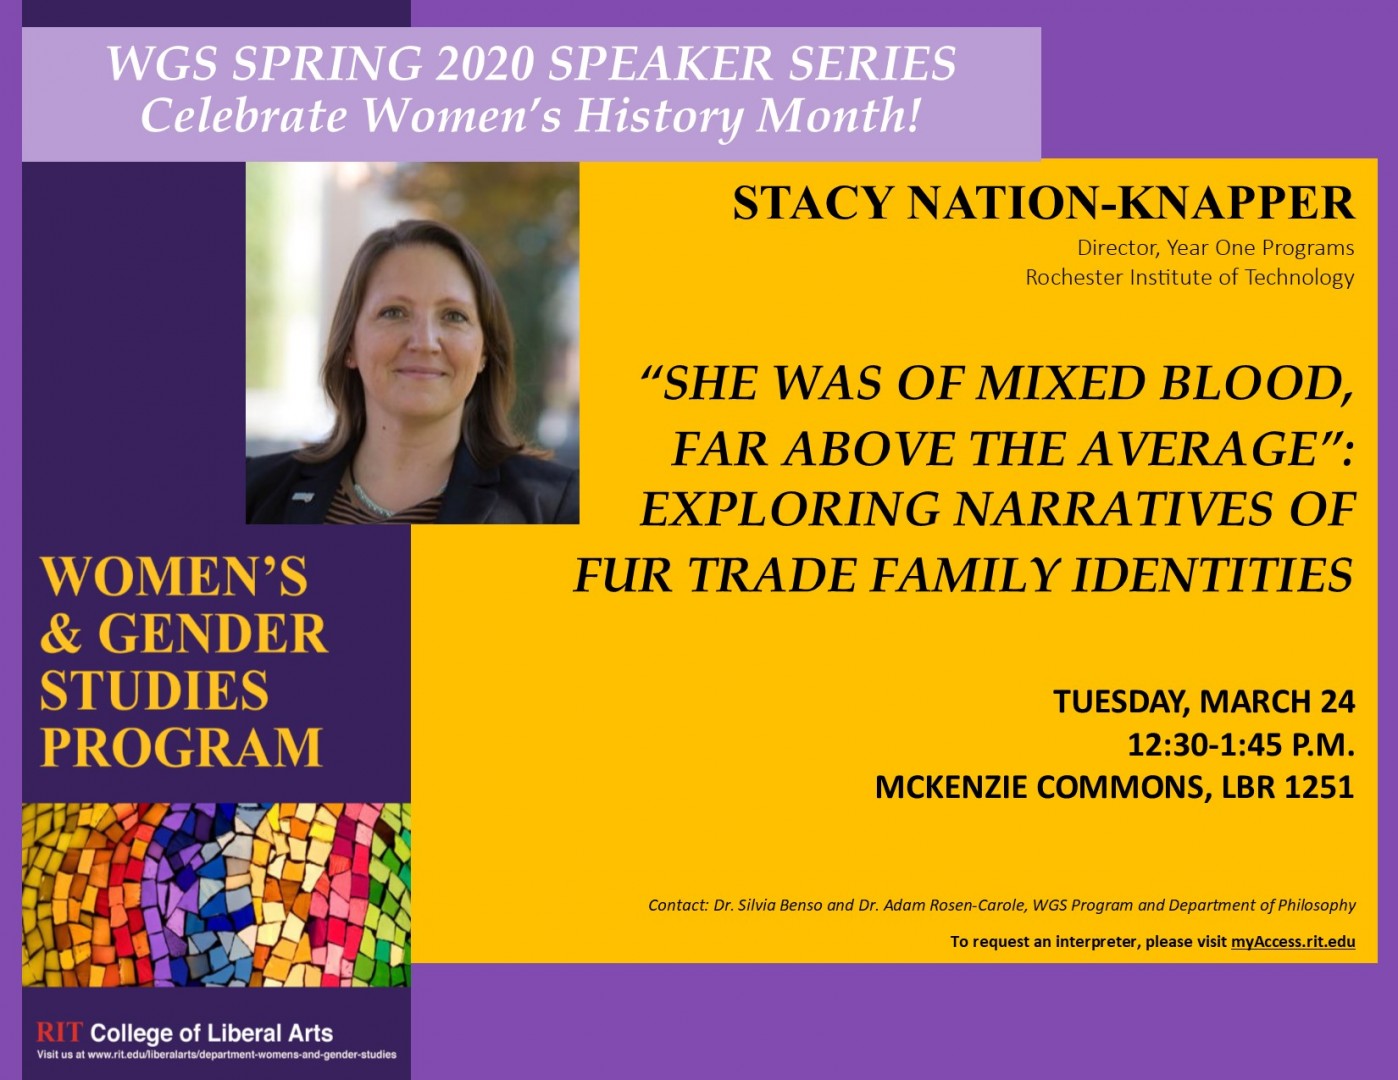 WGS Speaker Series--STACY NATION-KNAPPER,   “SHE WAS OF MIXED BLOOD,  FAR ABOVE THE AVERAGE”: EXPLORING NARRATIVES OF  FUR TRADE FAMILY IDENTITIES   TUESDAY, MARCH 24 12:30-1:45 P.M. MCKENZIE COMMONS, LBR 1251